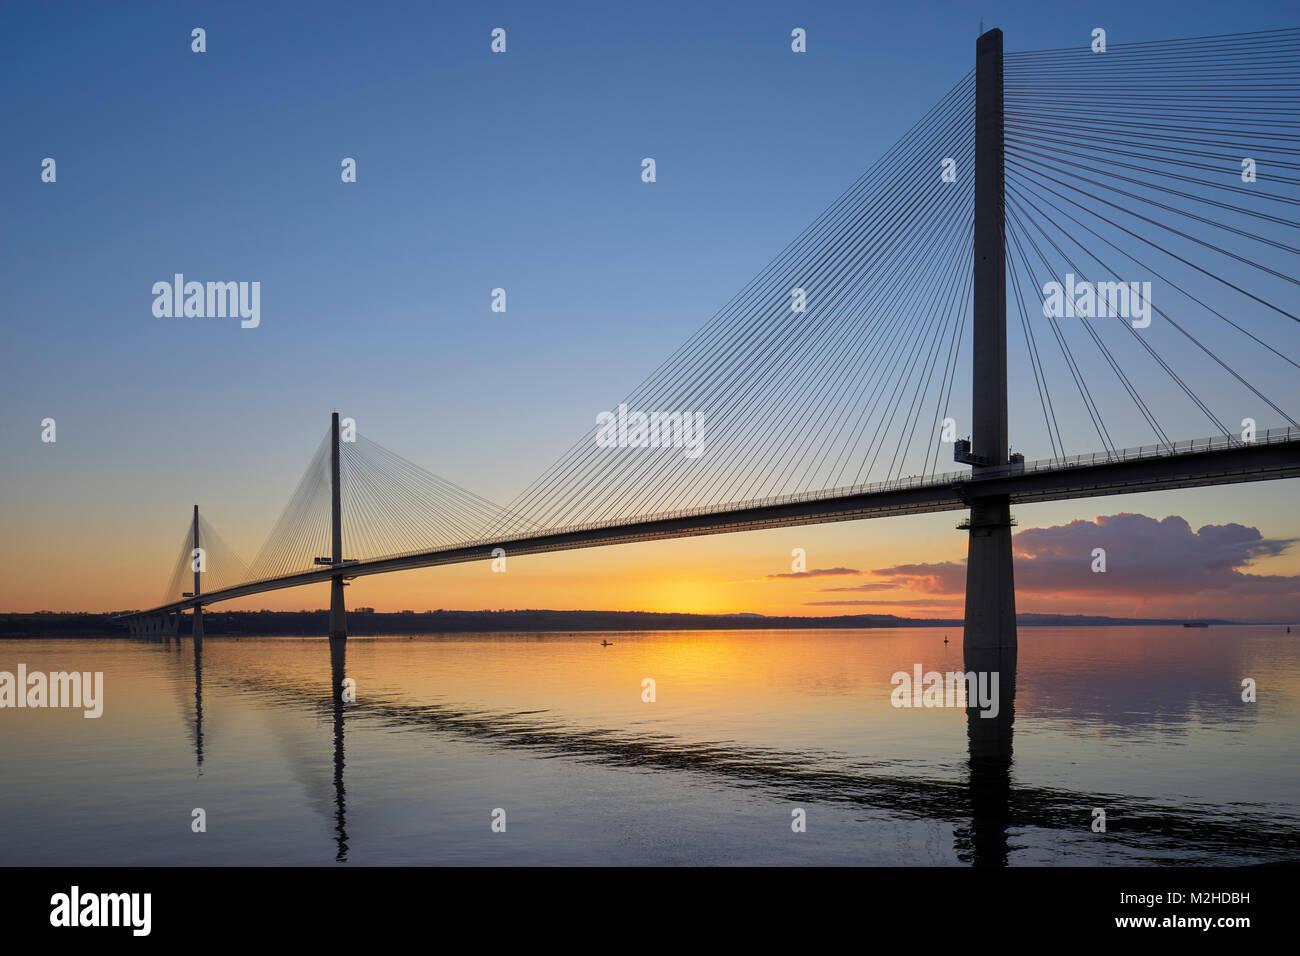 Queensferry Crossing Bridge from North Queensferry, Fife, Scotland at sunset with reflection Stock Photo